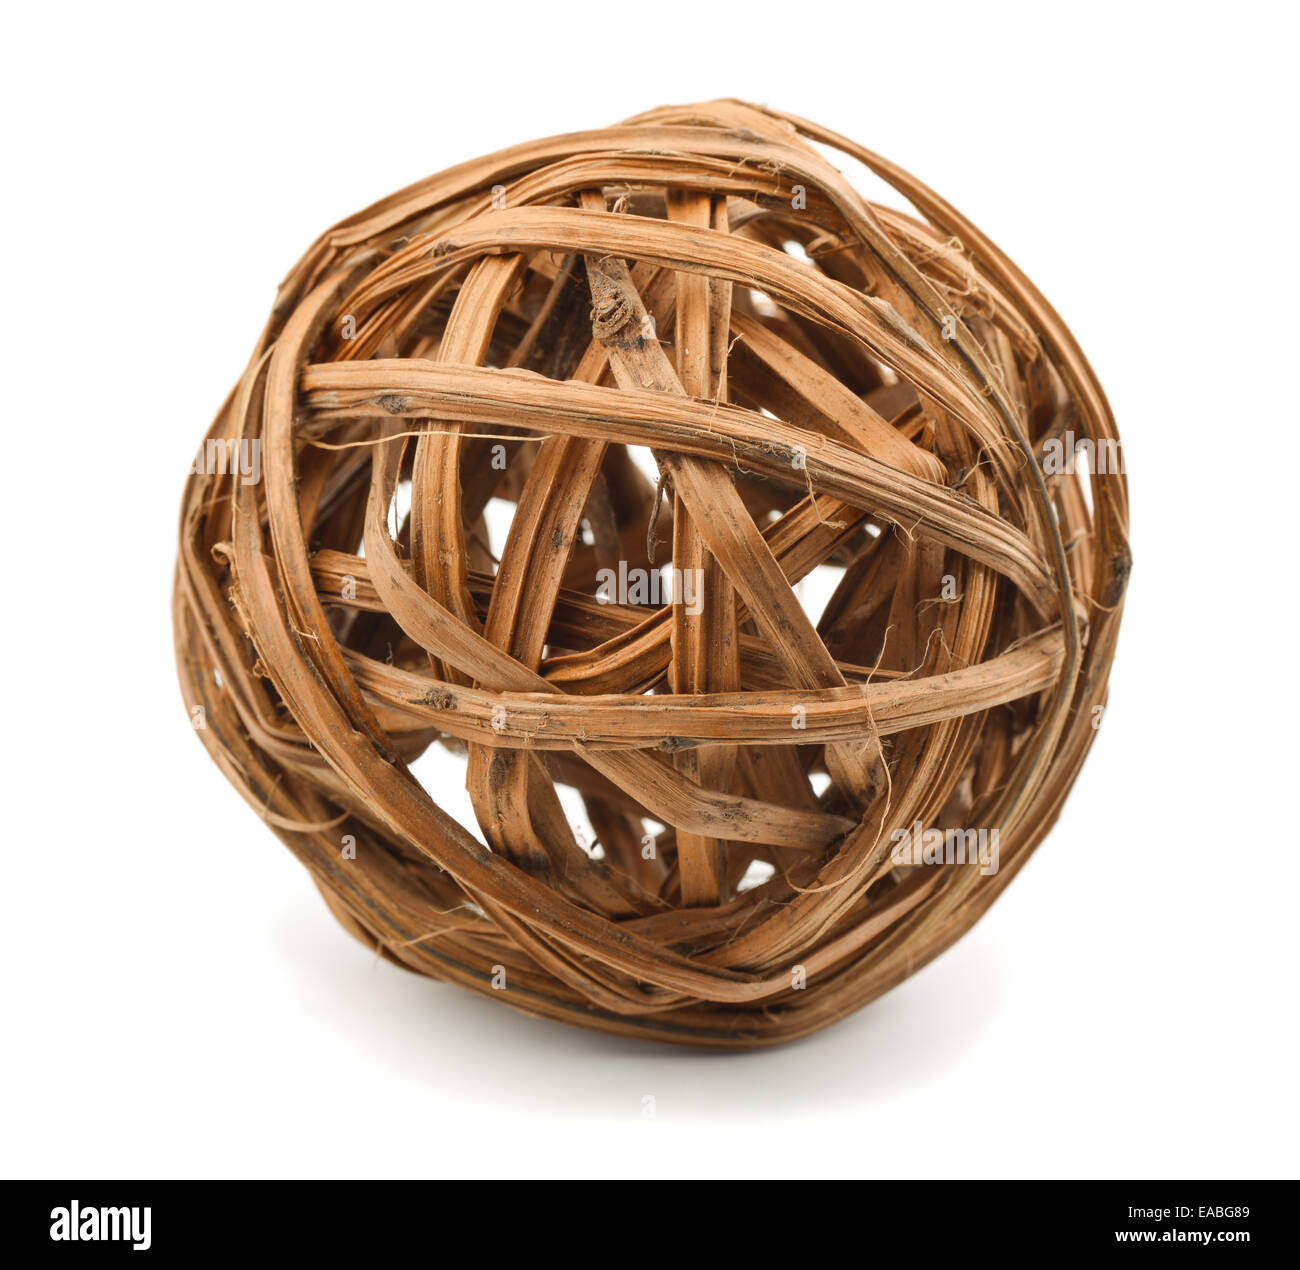 Decorative wooden wicker sphere isolated on white Stock Photo